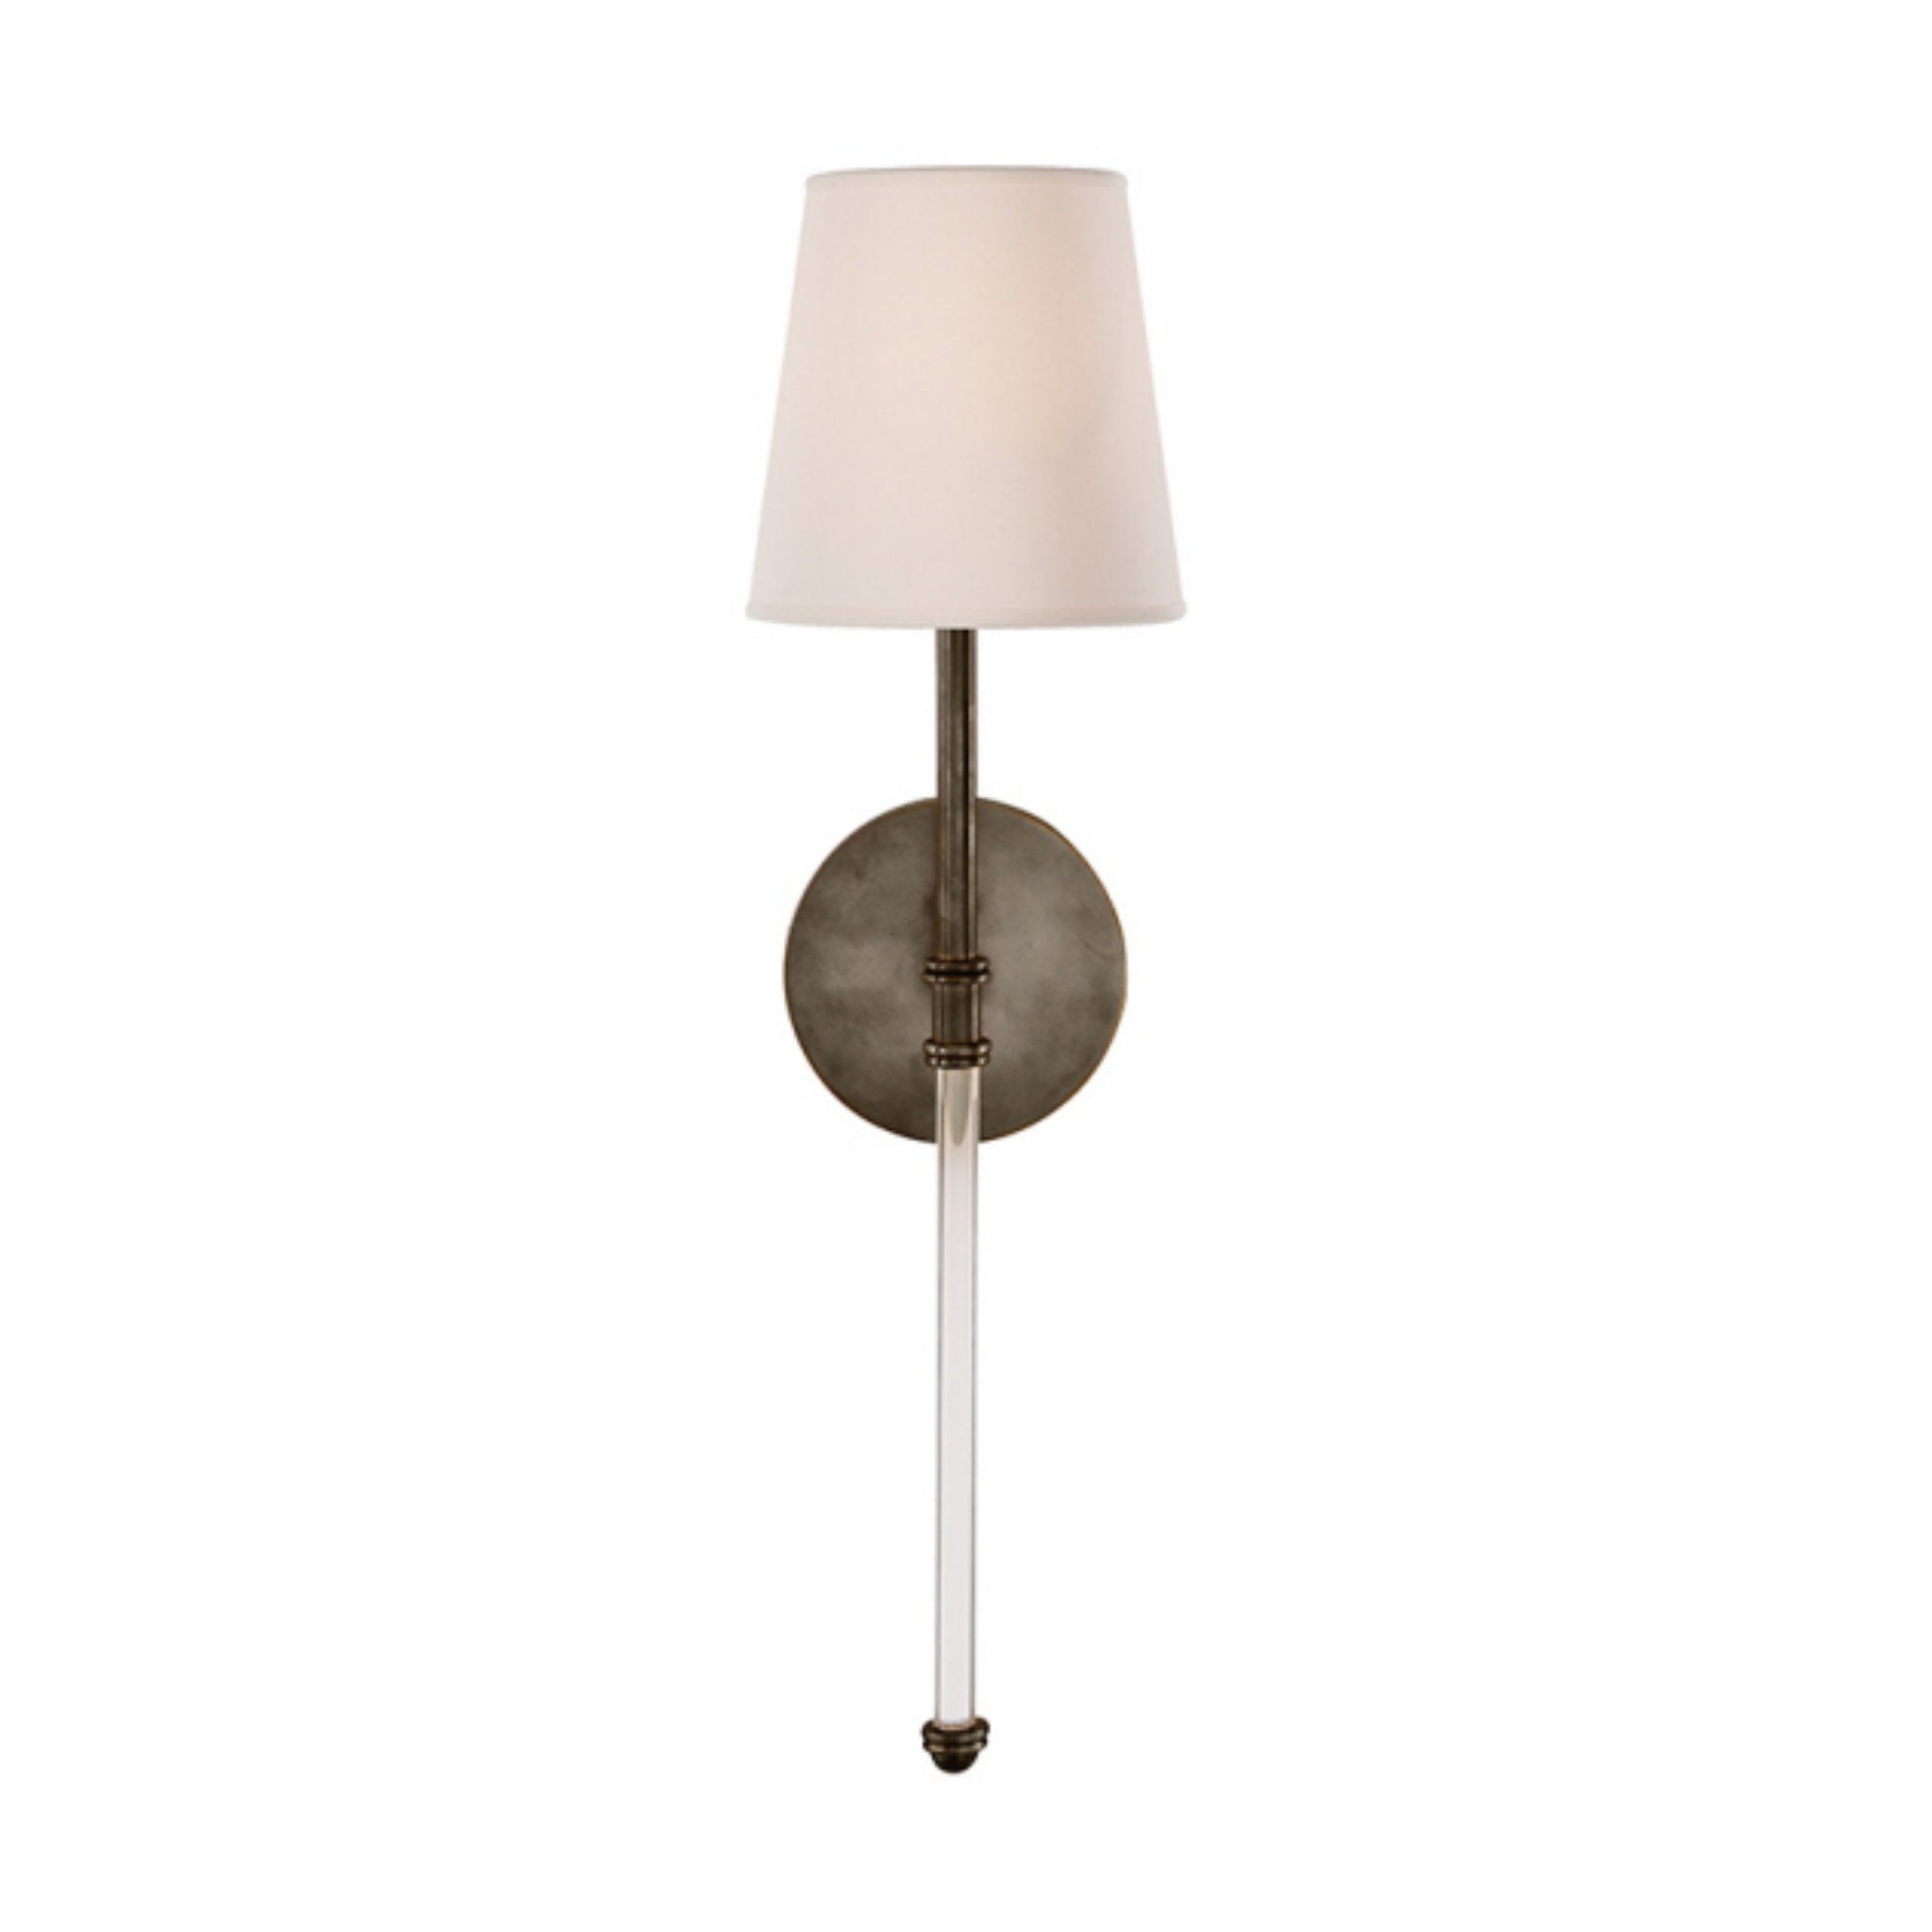 Suzanne Kasler Camille Sconce in Bronze with Natural Paper Shade